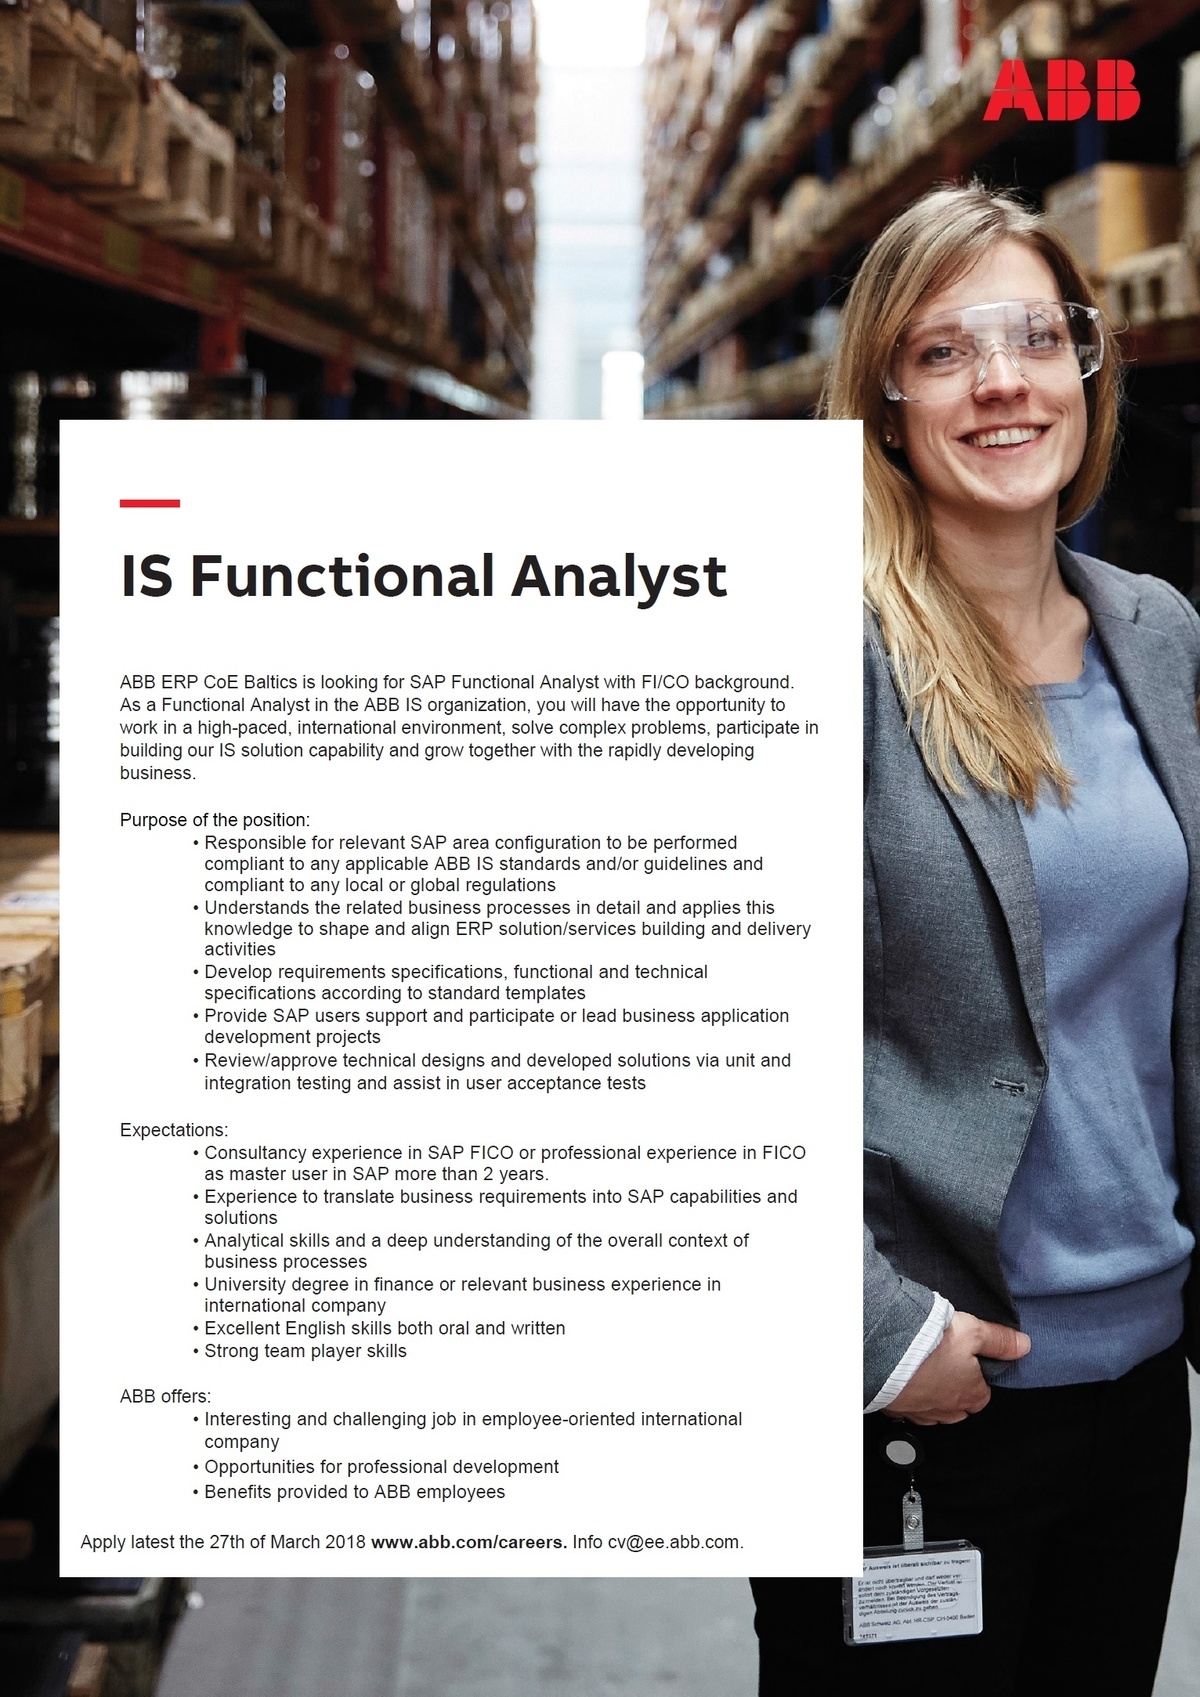 ABB AS IS Functional Analyst